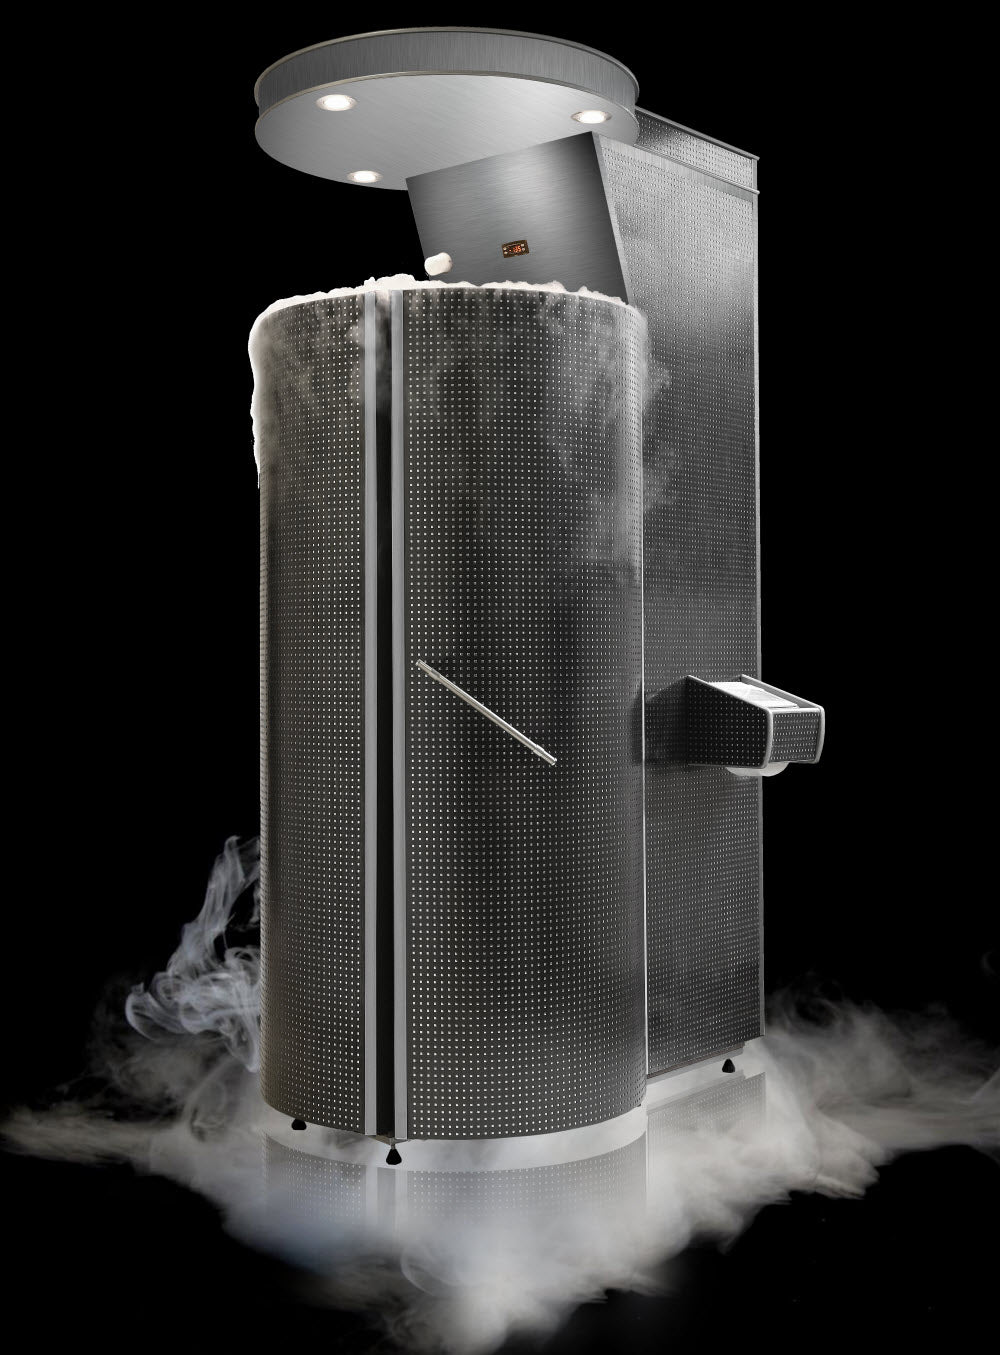 Cryotherapy - Daily Access